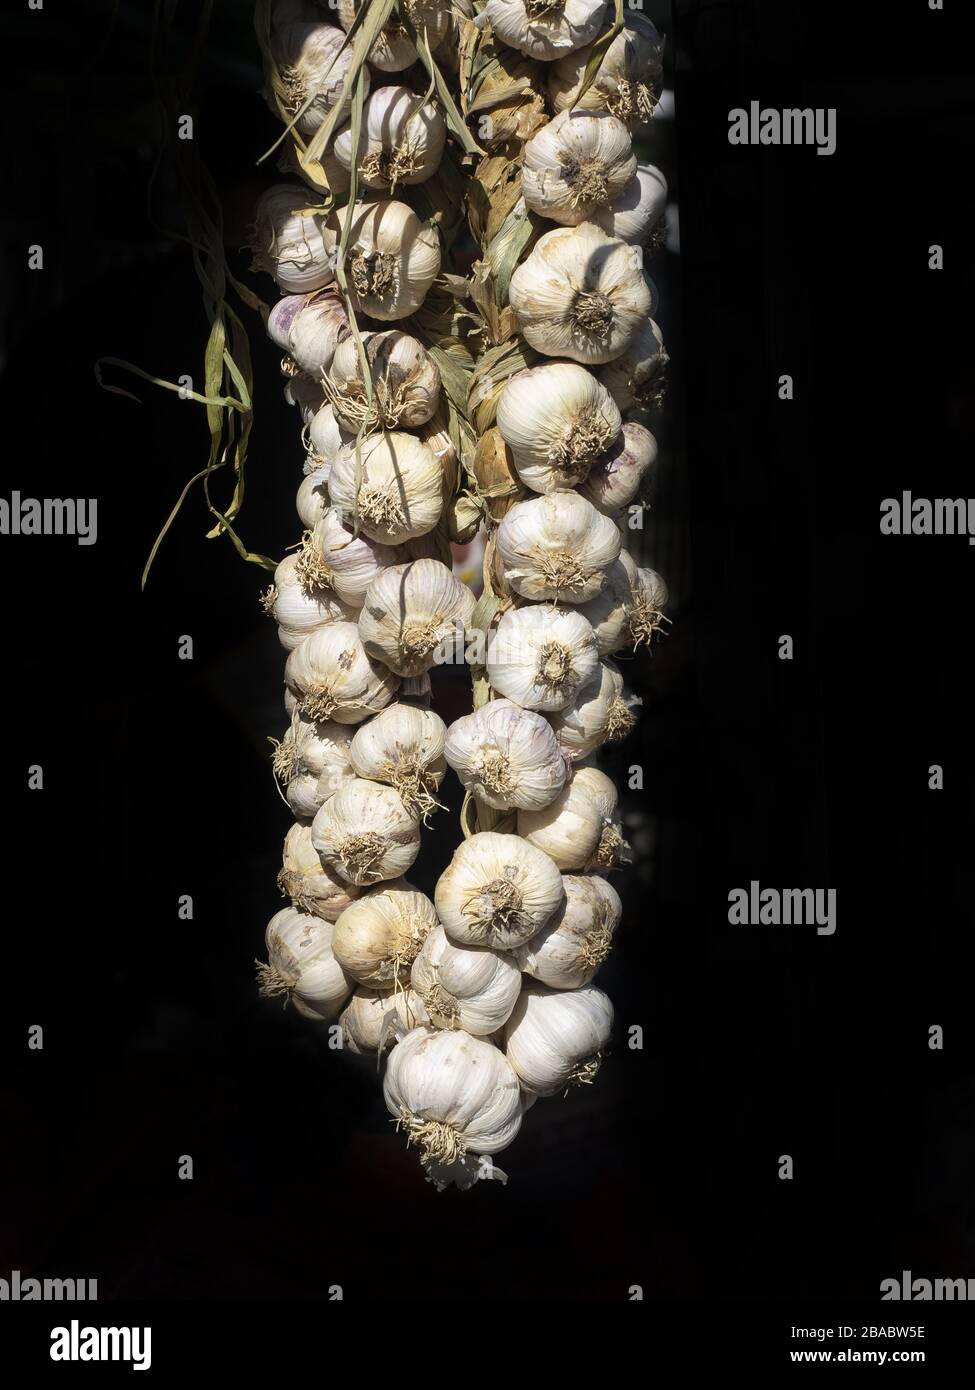 big garlic braid exposed to sunlight in a country market. Black background Stock Photo